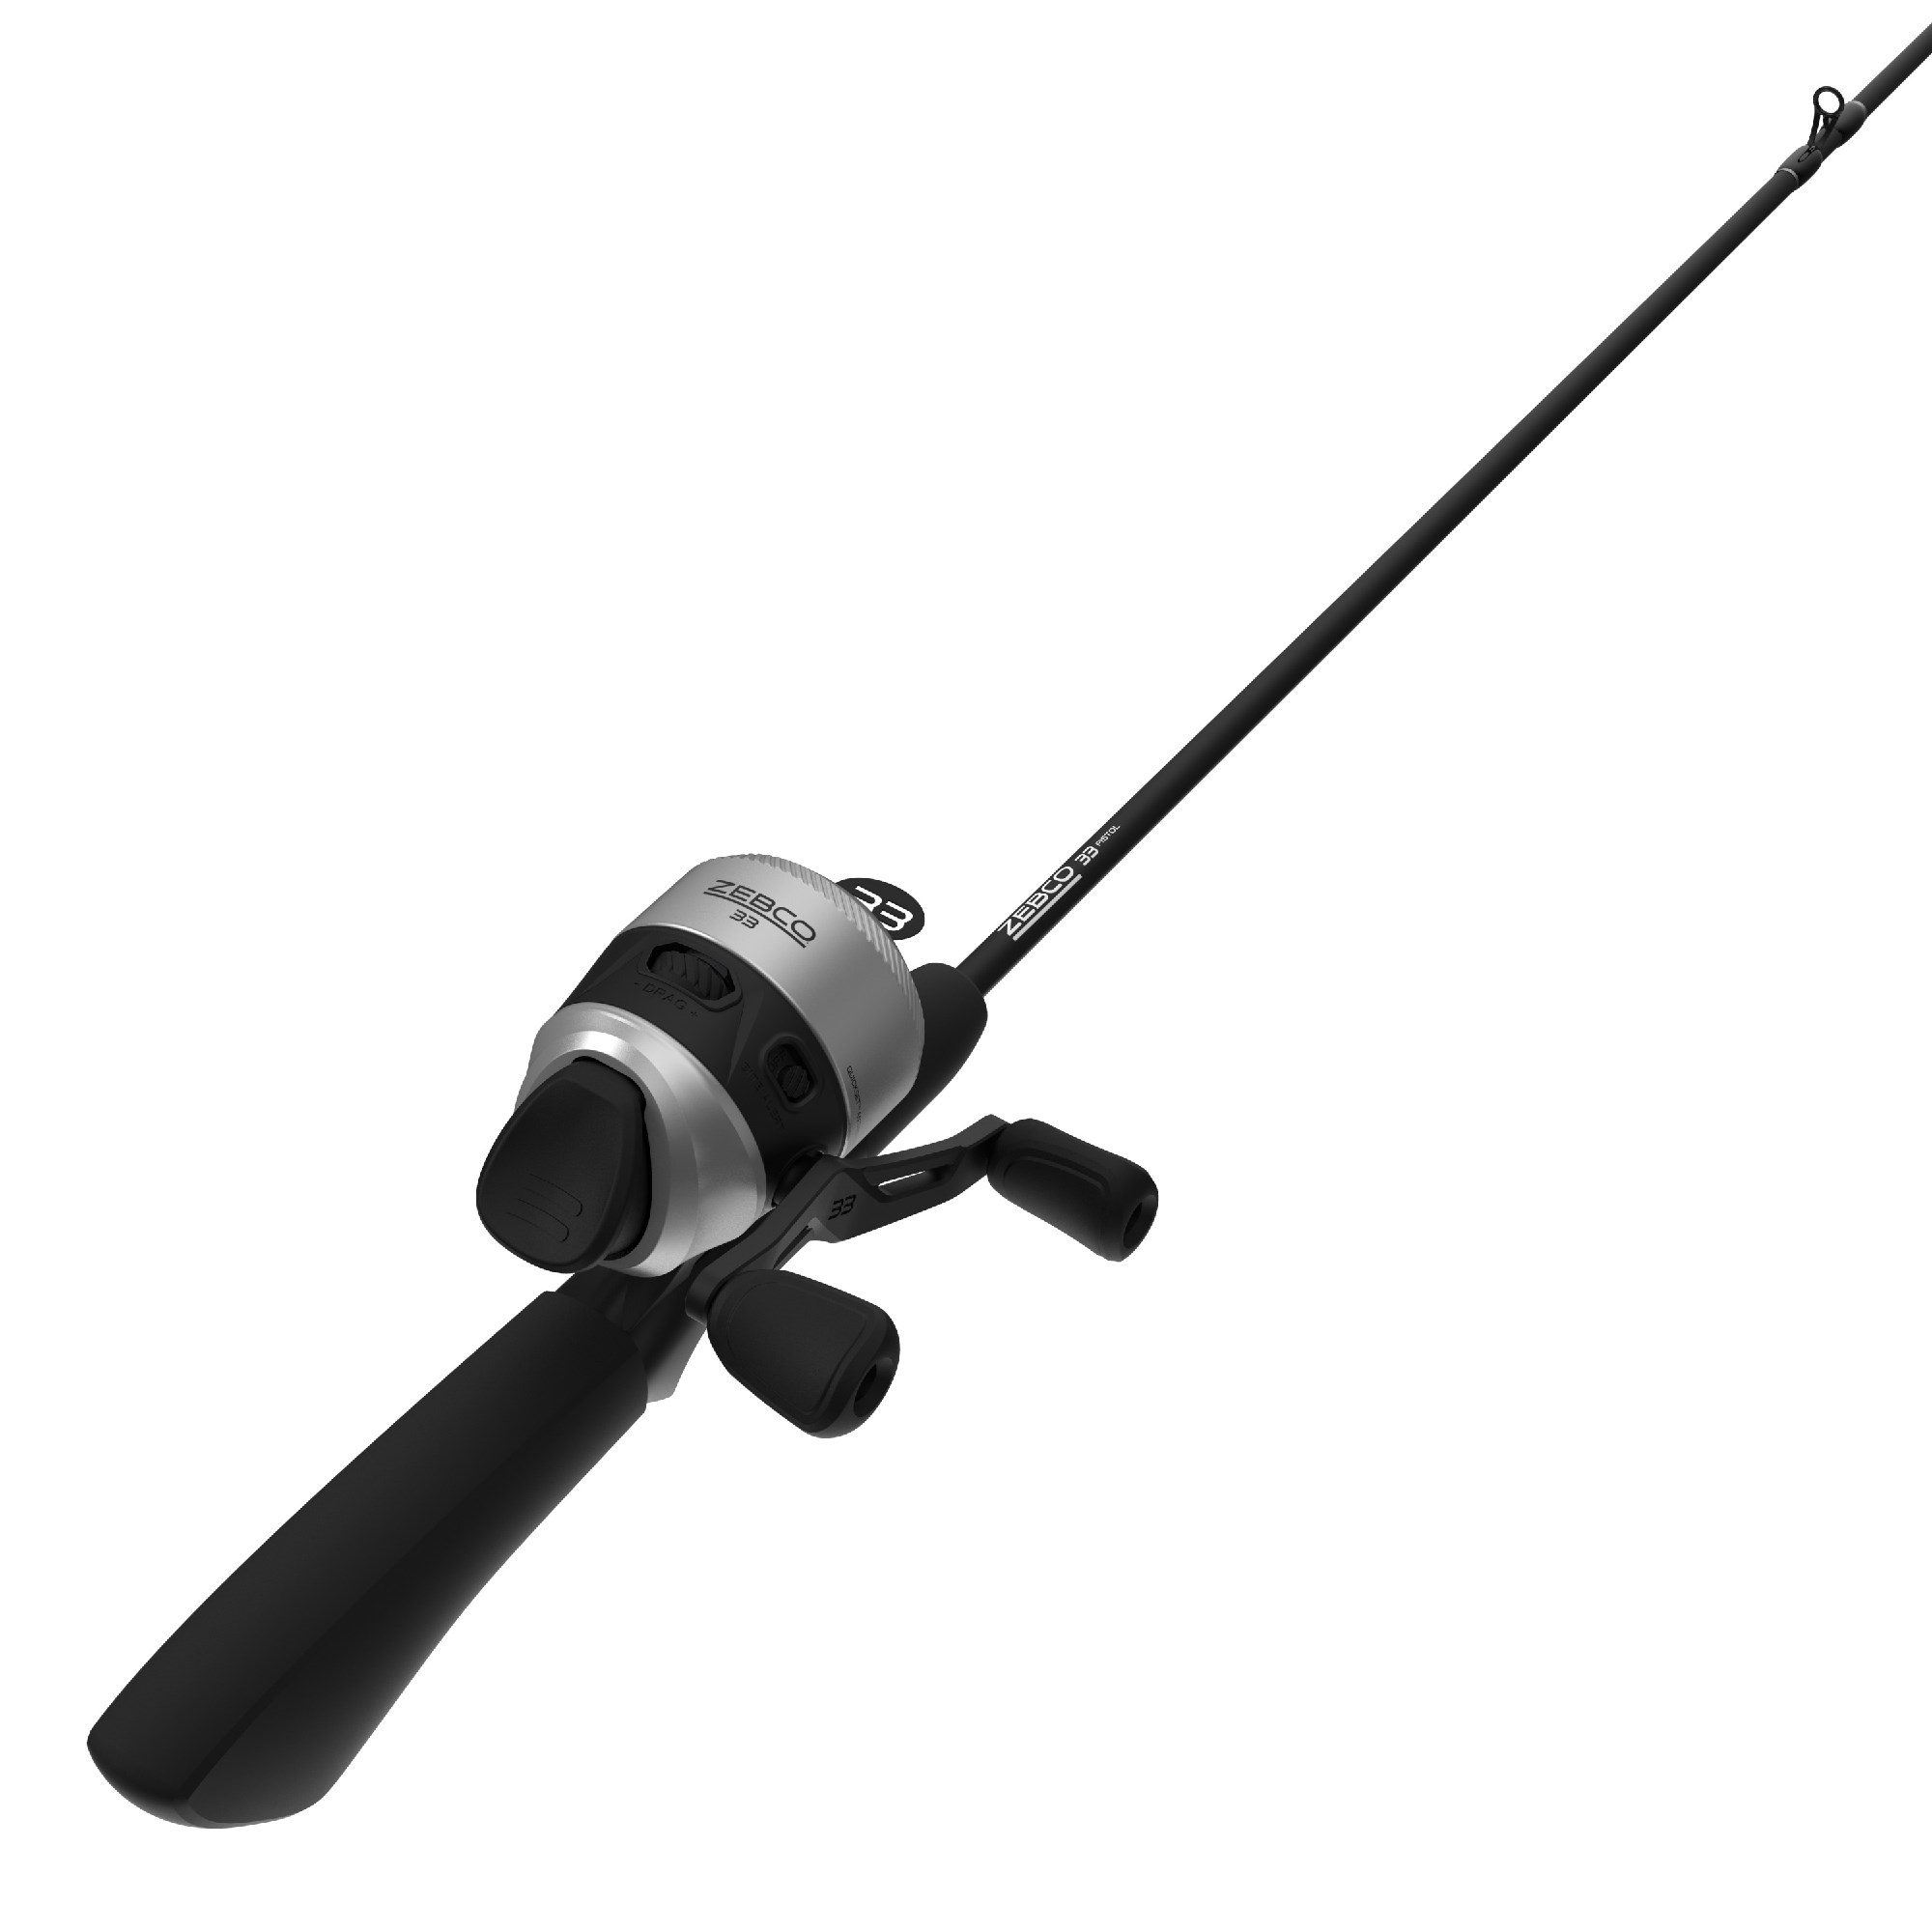 Zebco 33 Micro Spincast Reel and Fishing Rod Combo, 5-Foot 2-Piece